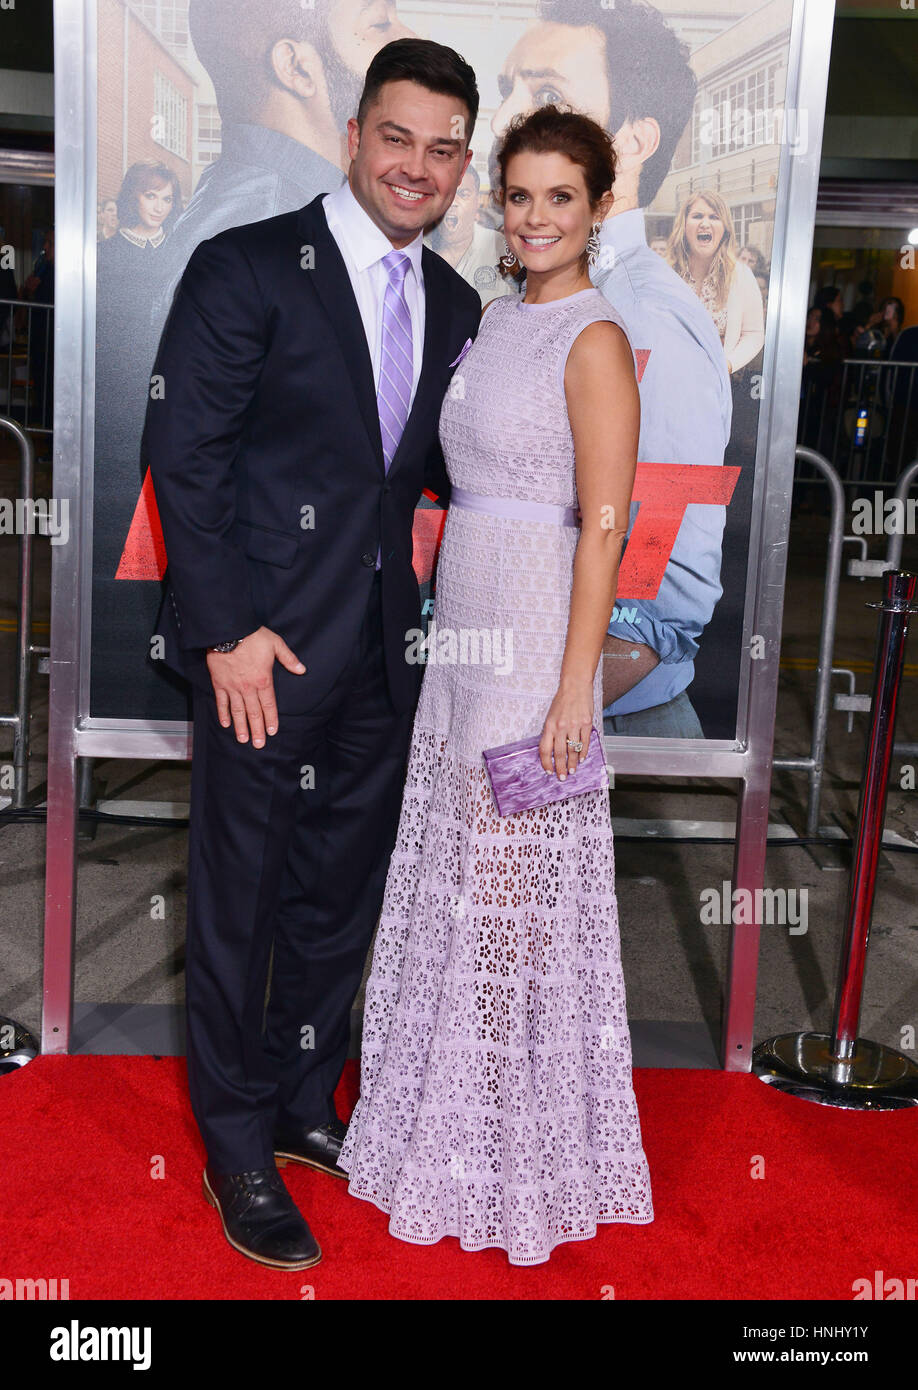 Los Angeles, USA. 13th February 2017. Joanna Garcia Swisher  and Husband Nick Swisher 057 arriving at the Fist Fight Premiere at the Westwood Village Theatre in Los Angeles. February 13, 2017. Credit: Tsuni / USA/Alamy Live News Stock Photo